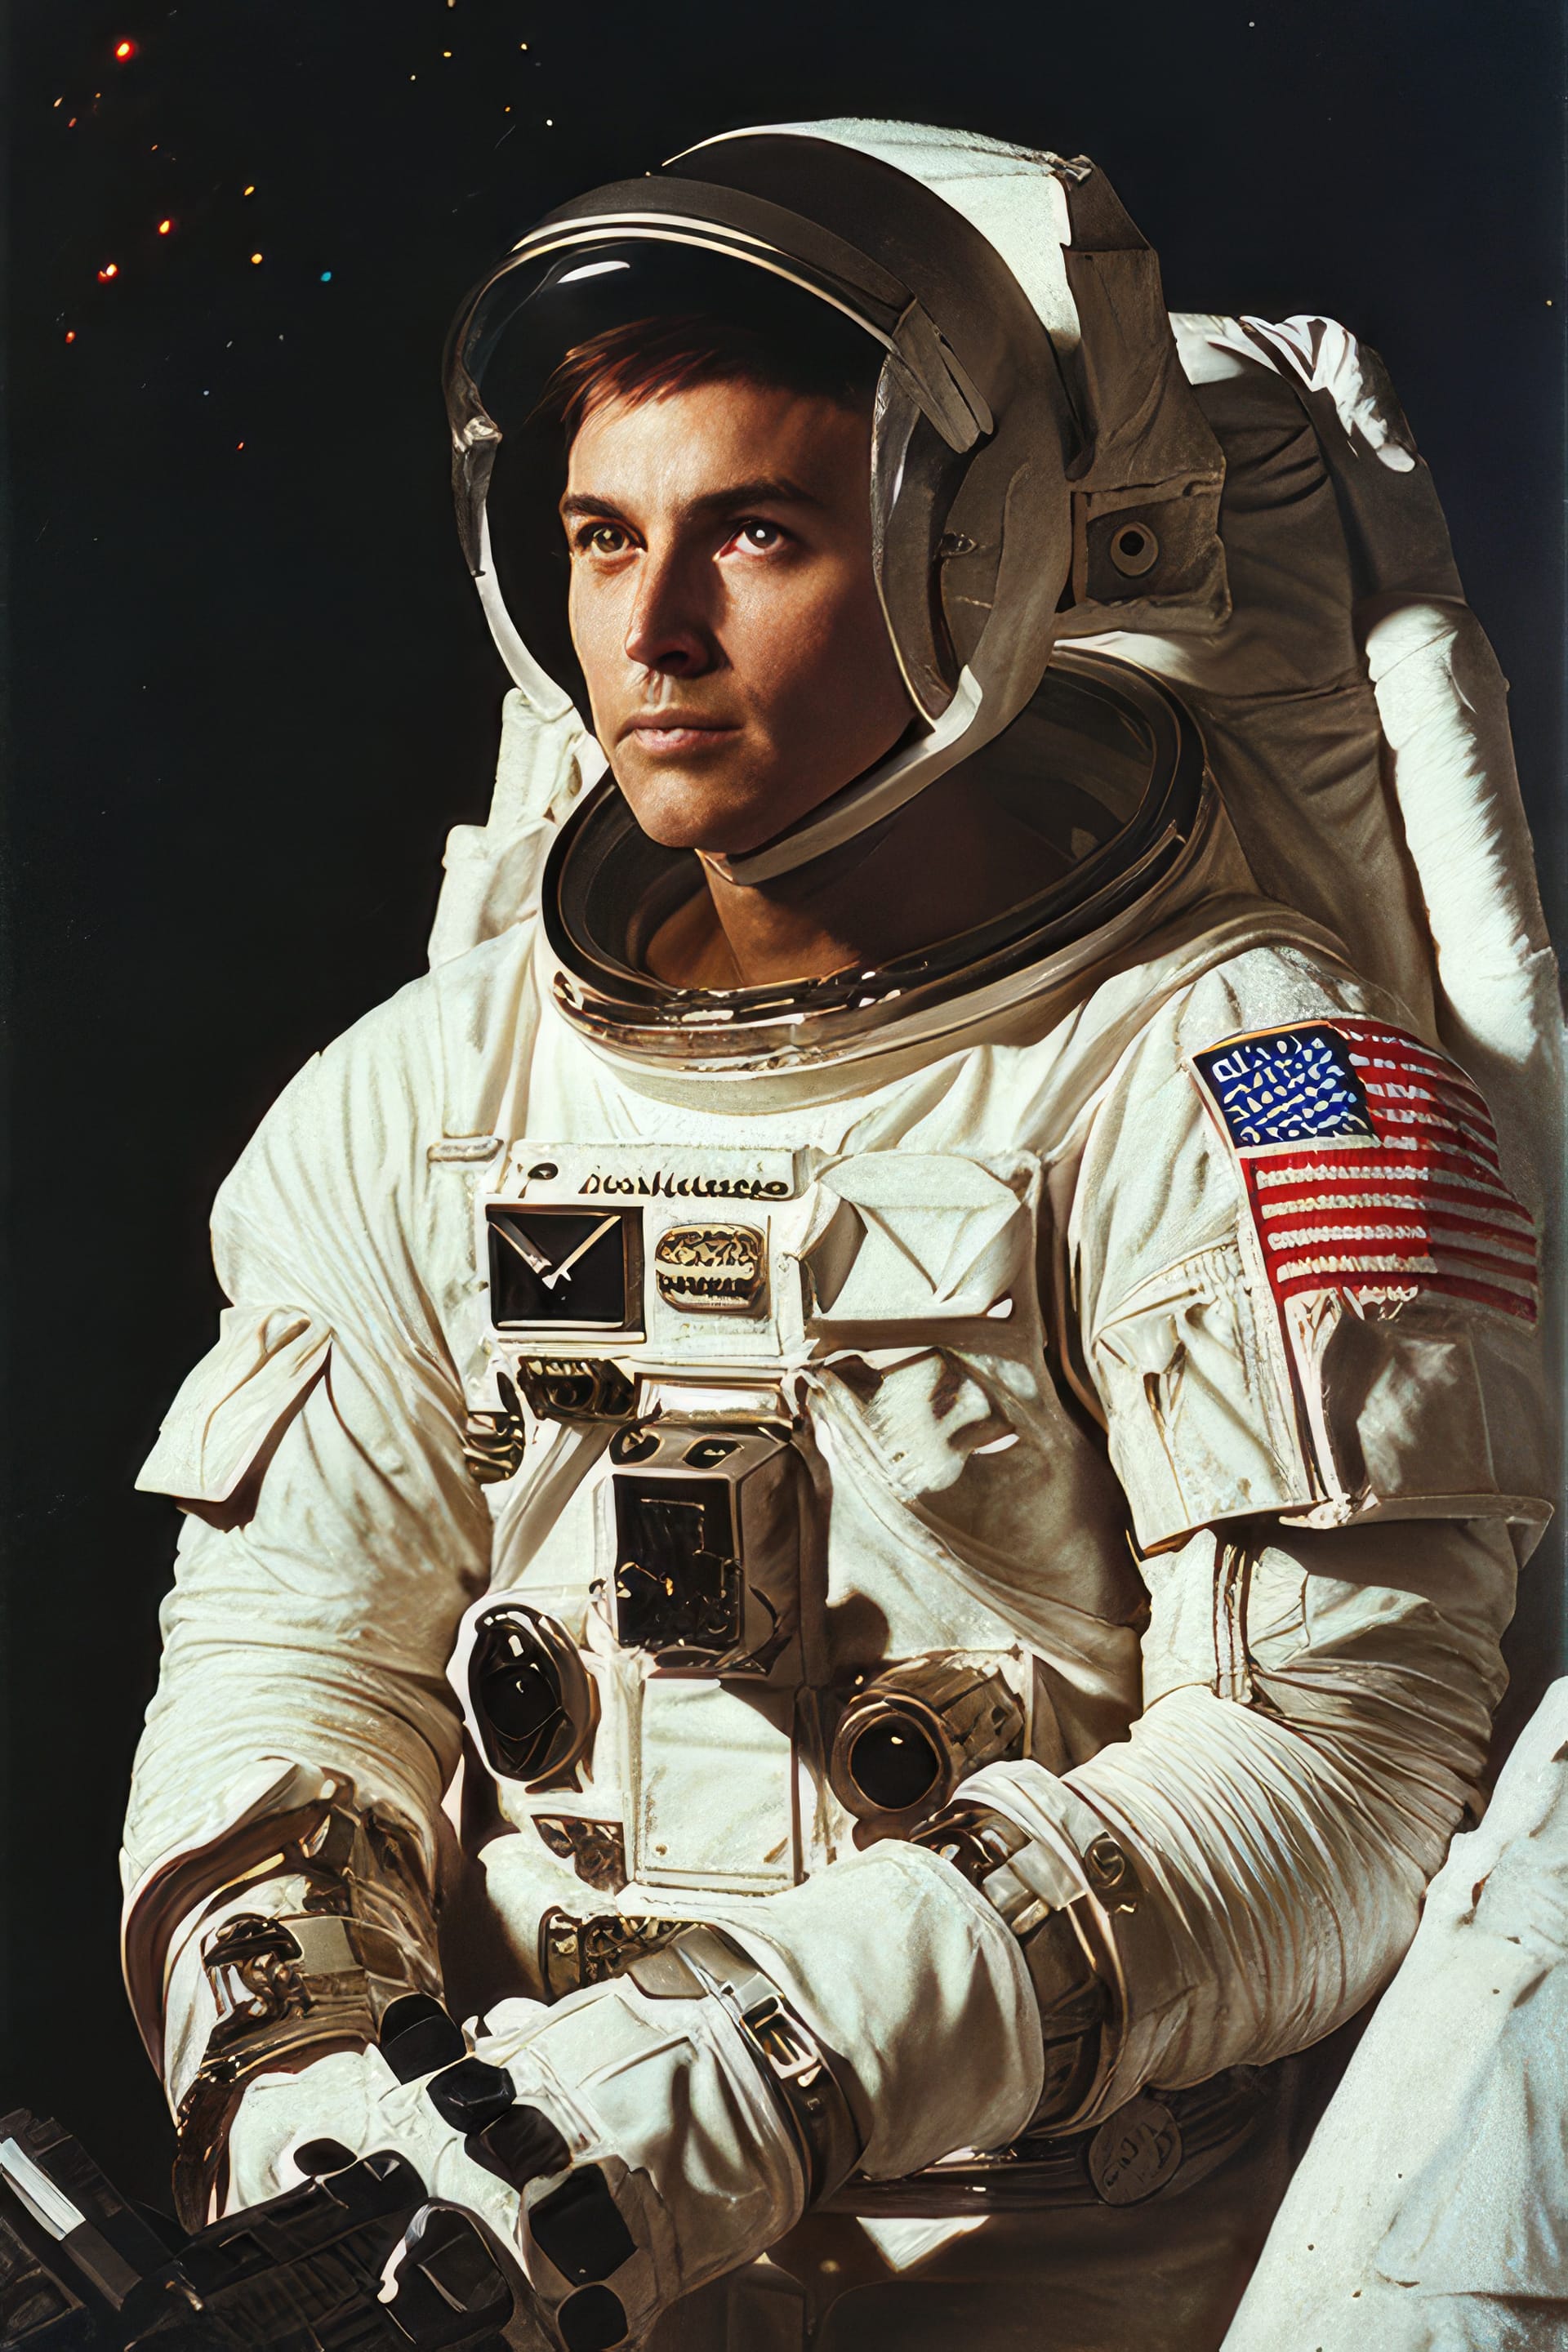 Man astronaut suit with american flag and helmet